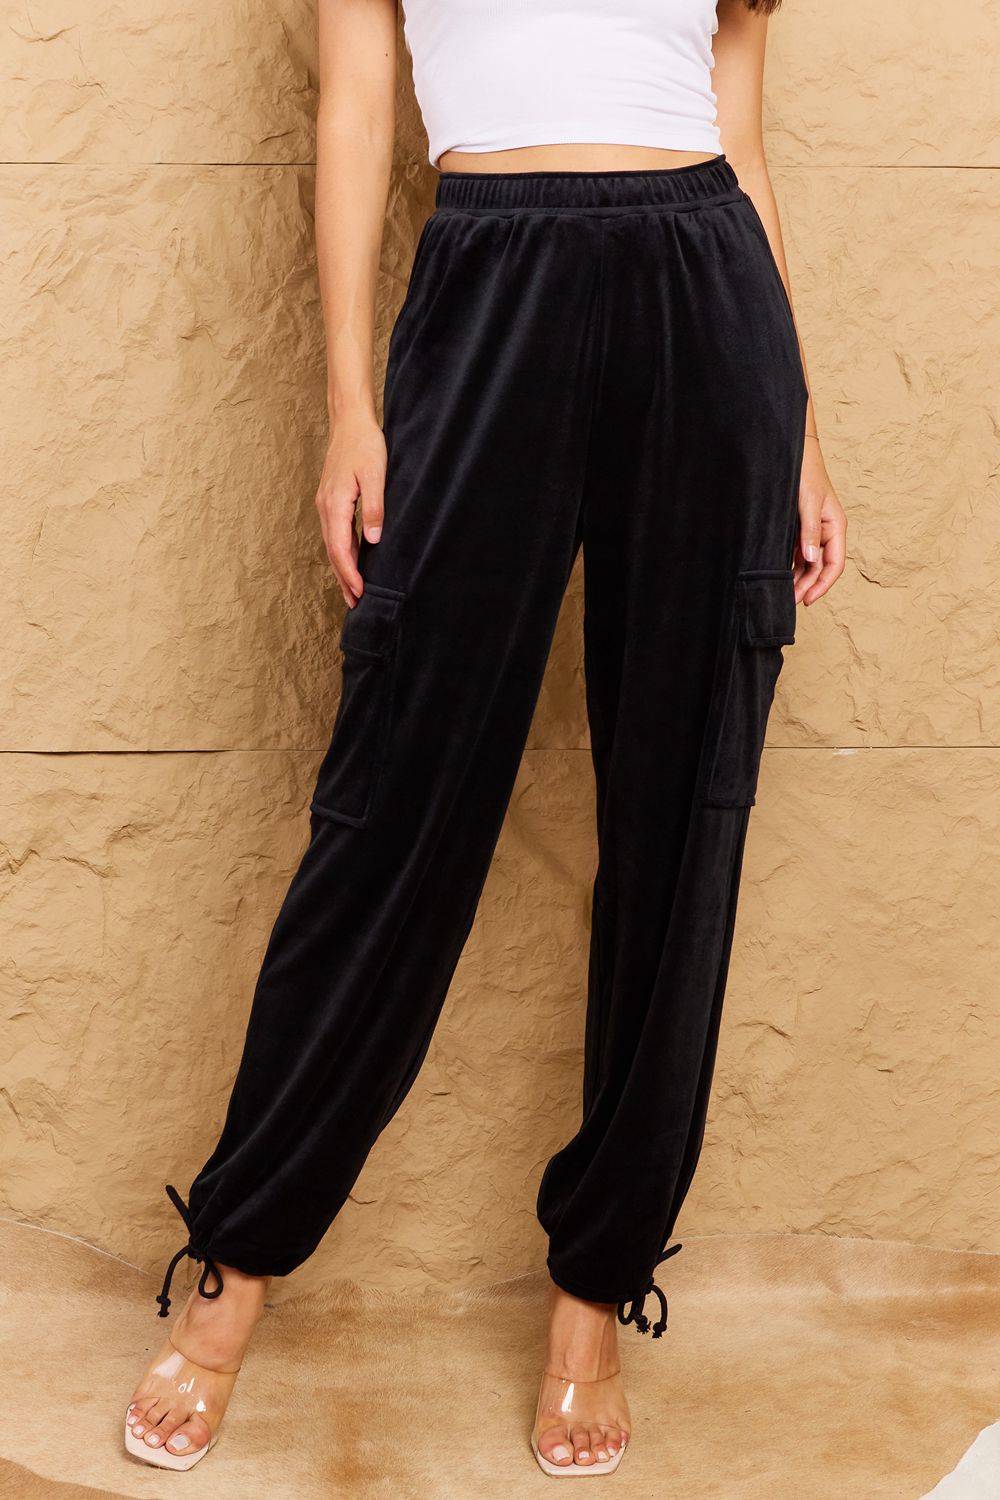 BACK TO SCHOOL    Chic For Days High Waist Drawstring Cargo Pants in Black